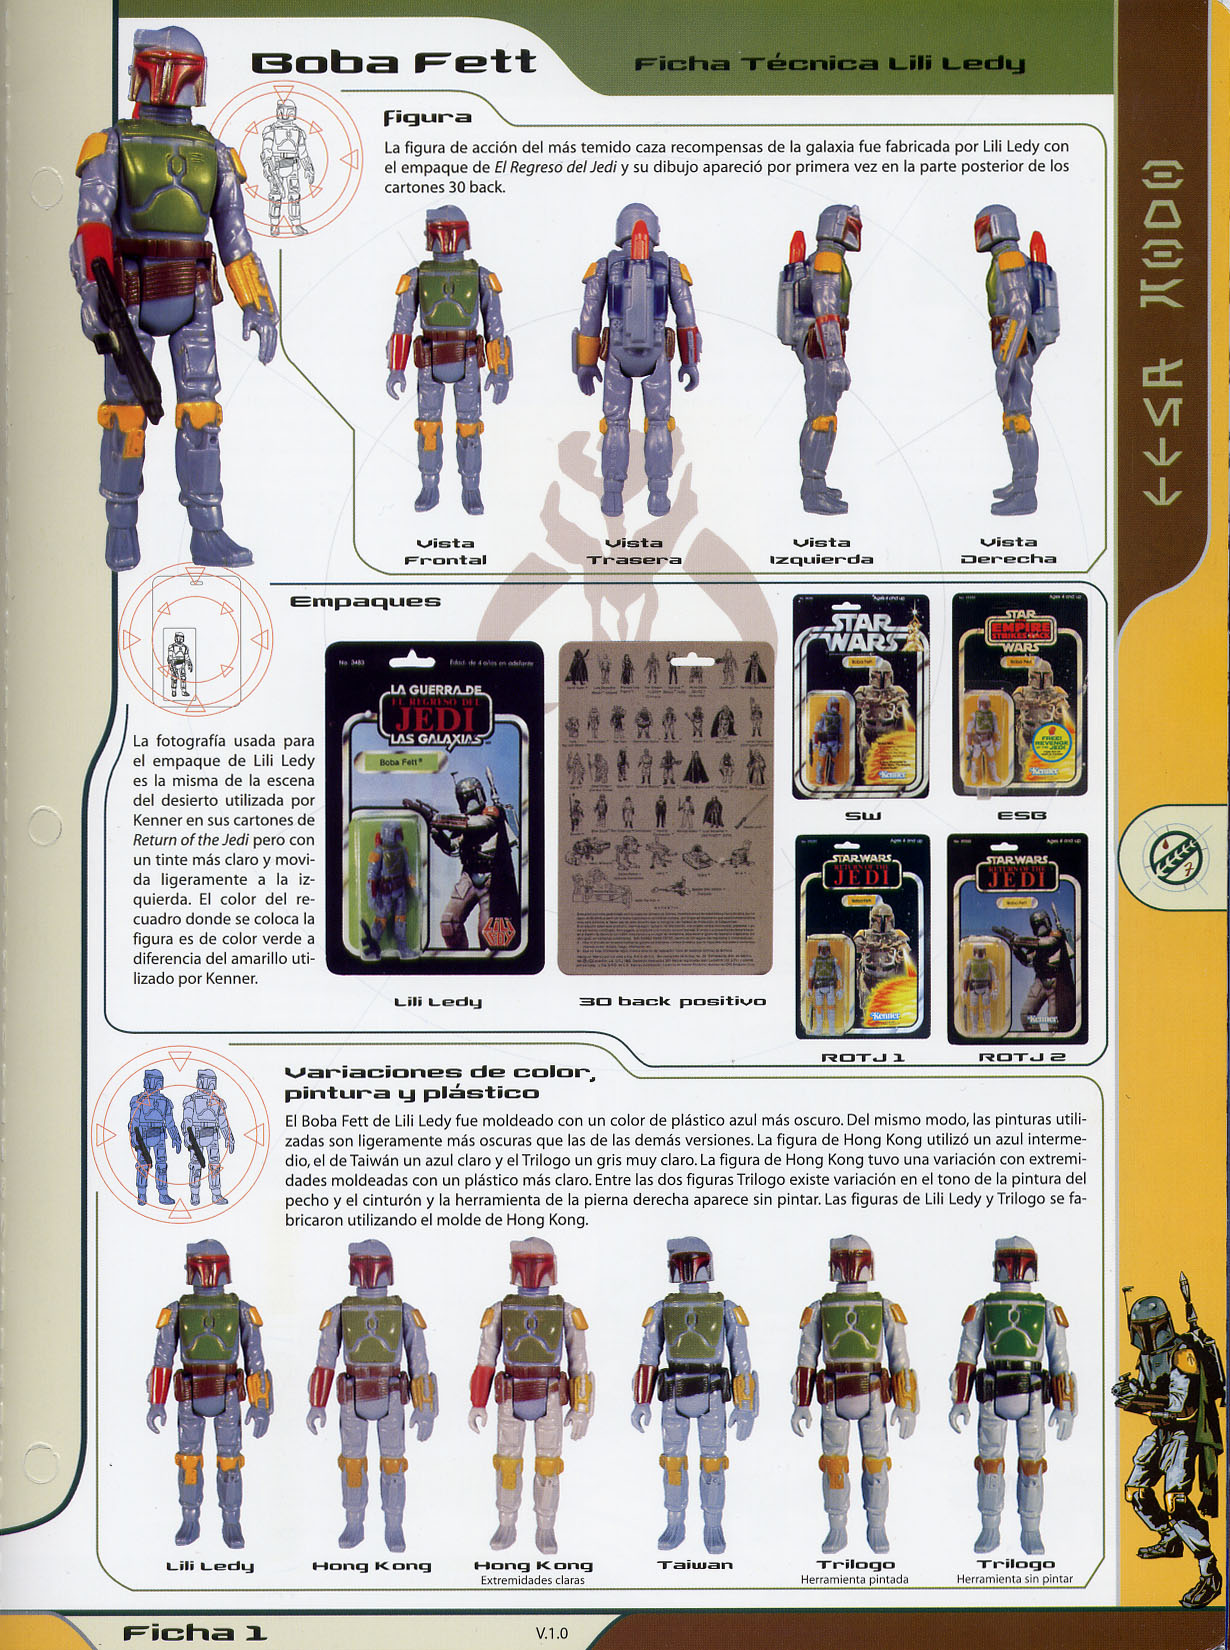 Boba Fett Loose variant – In depth discussion about discoloration and yellowing Universo-bobafett-front